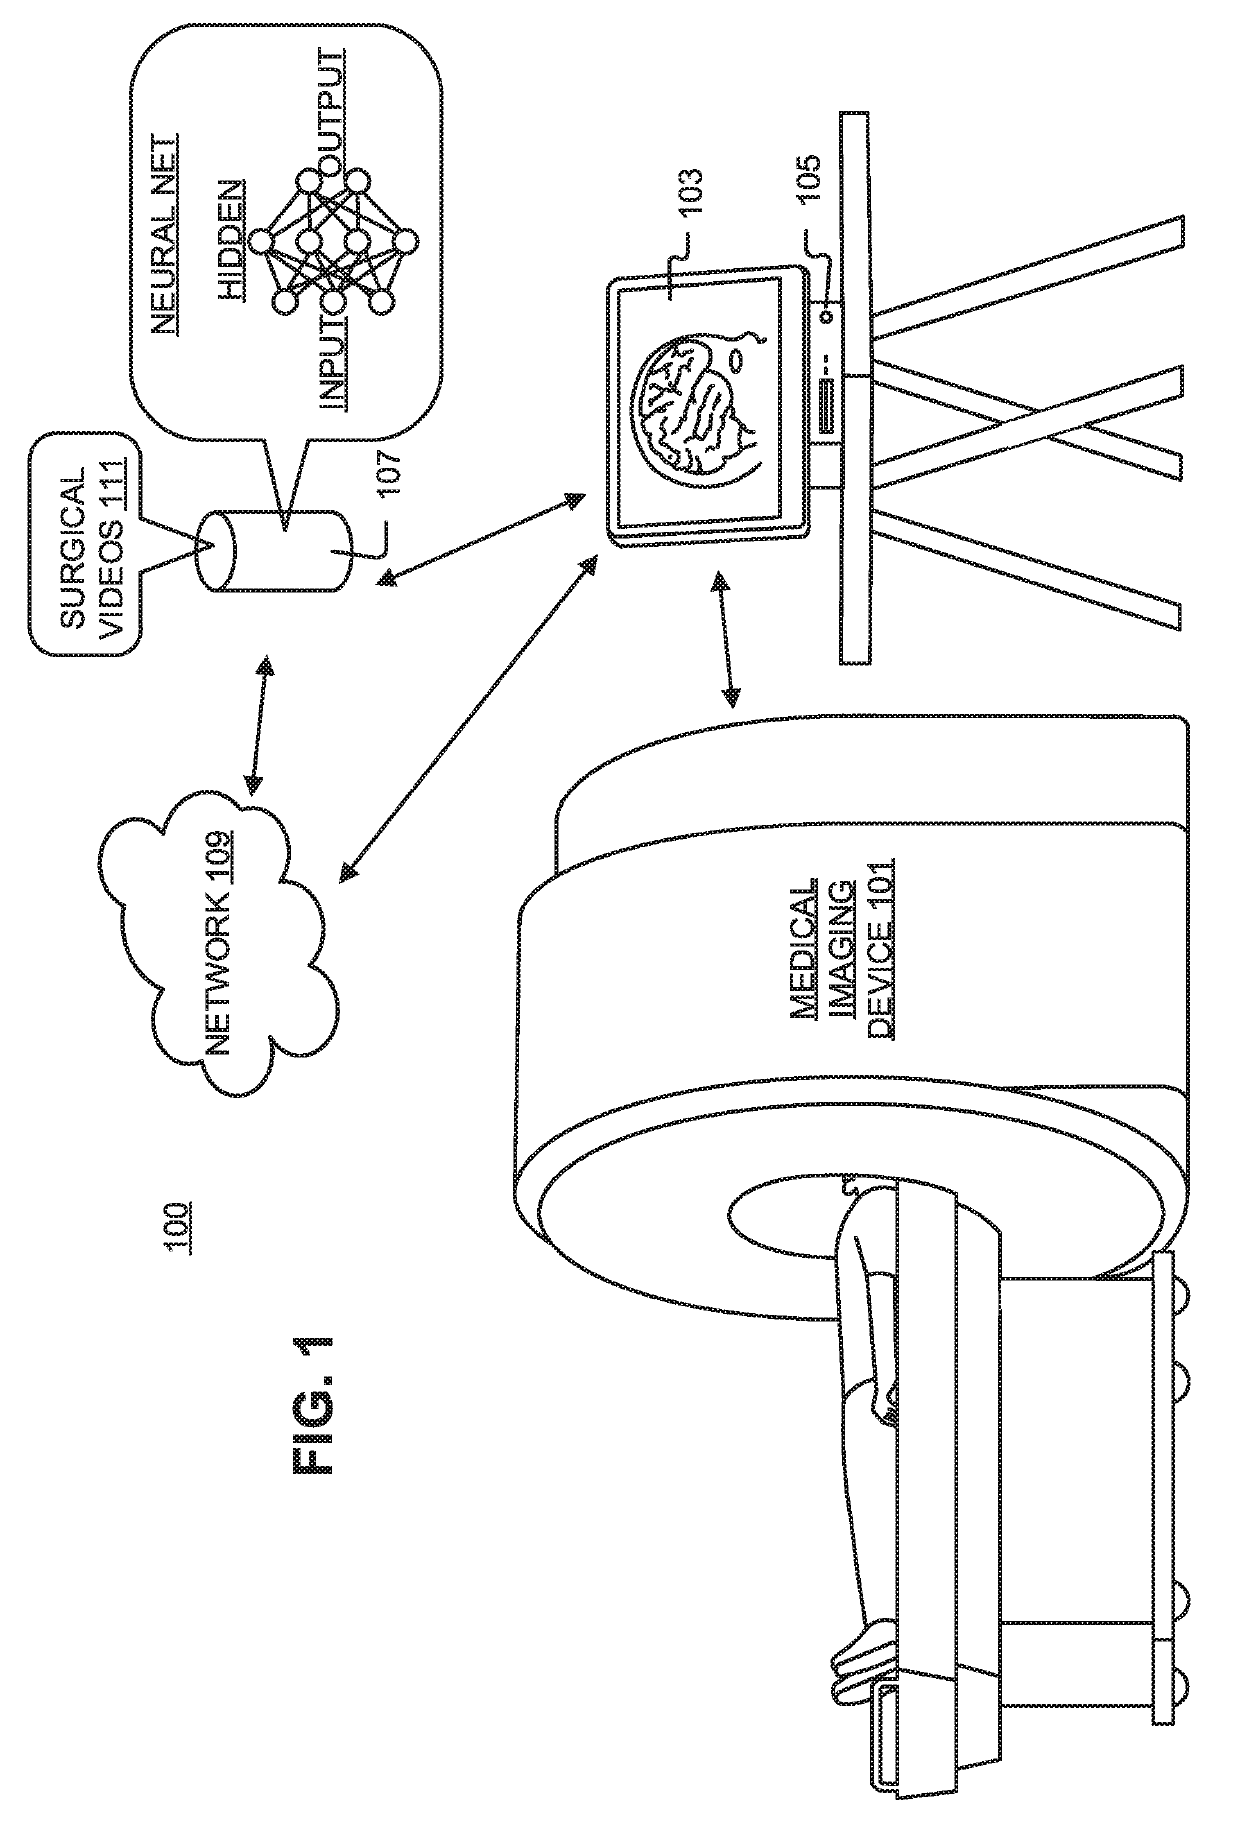 Surgical video retrieval based on preoperative images